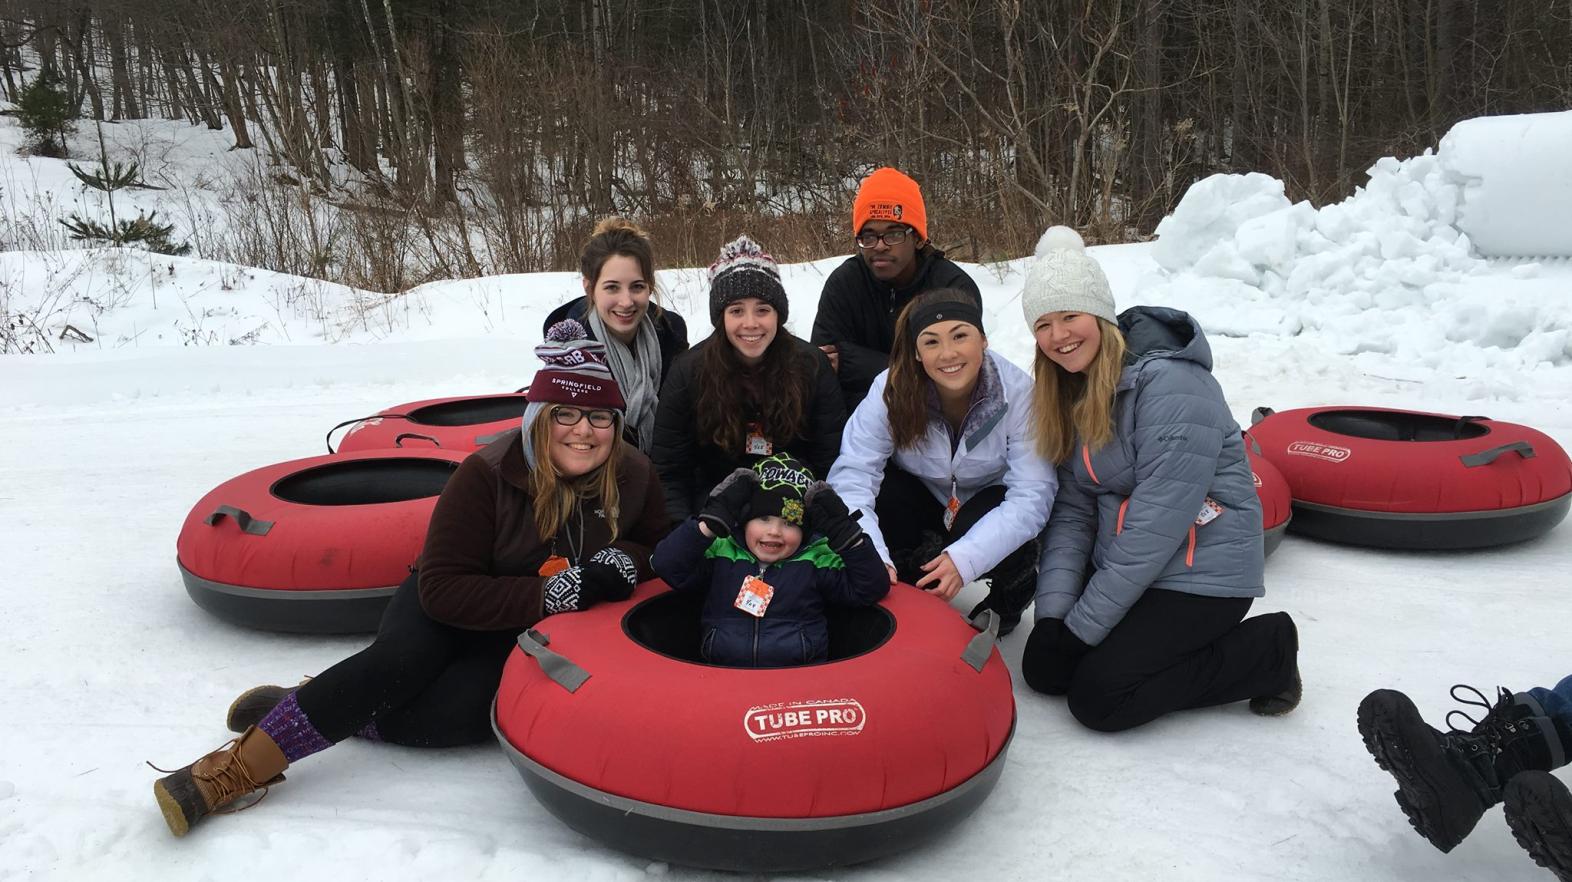 Springfield College students go snow tubing as part of the Office of Student Activities Events